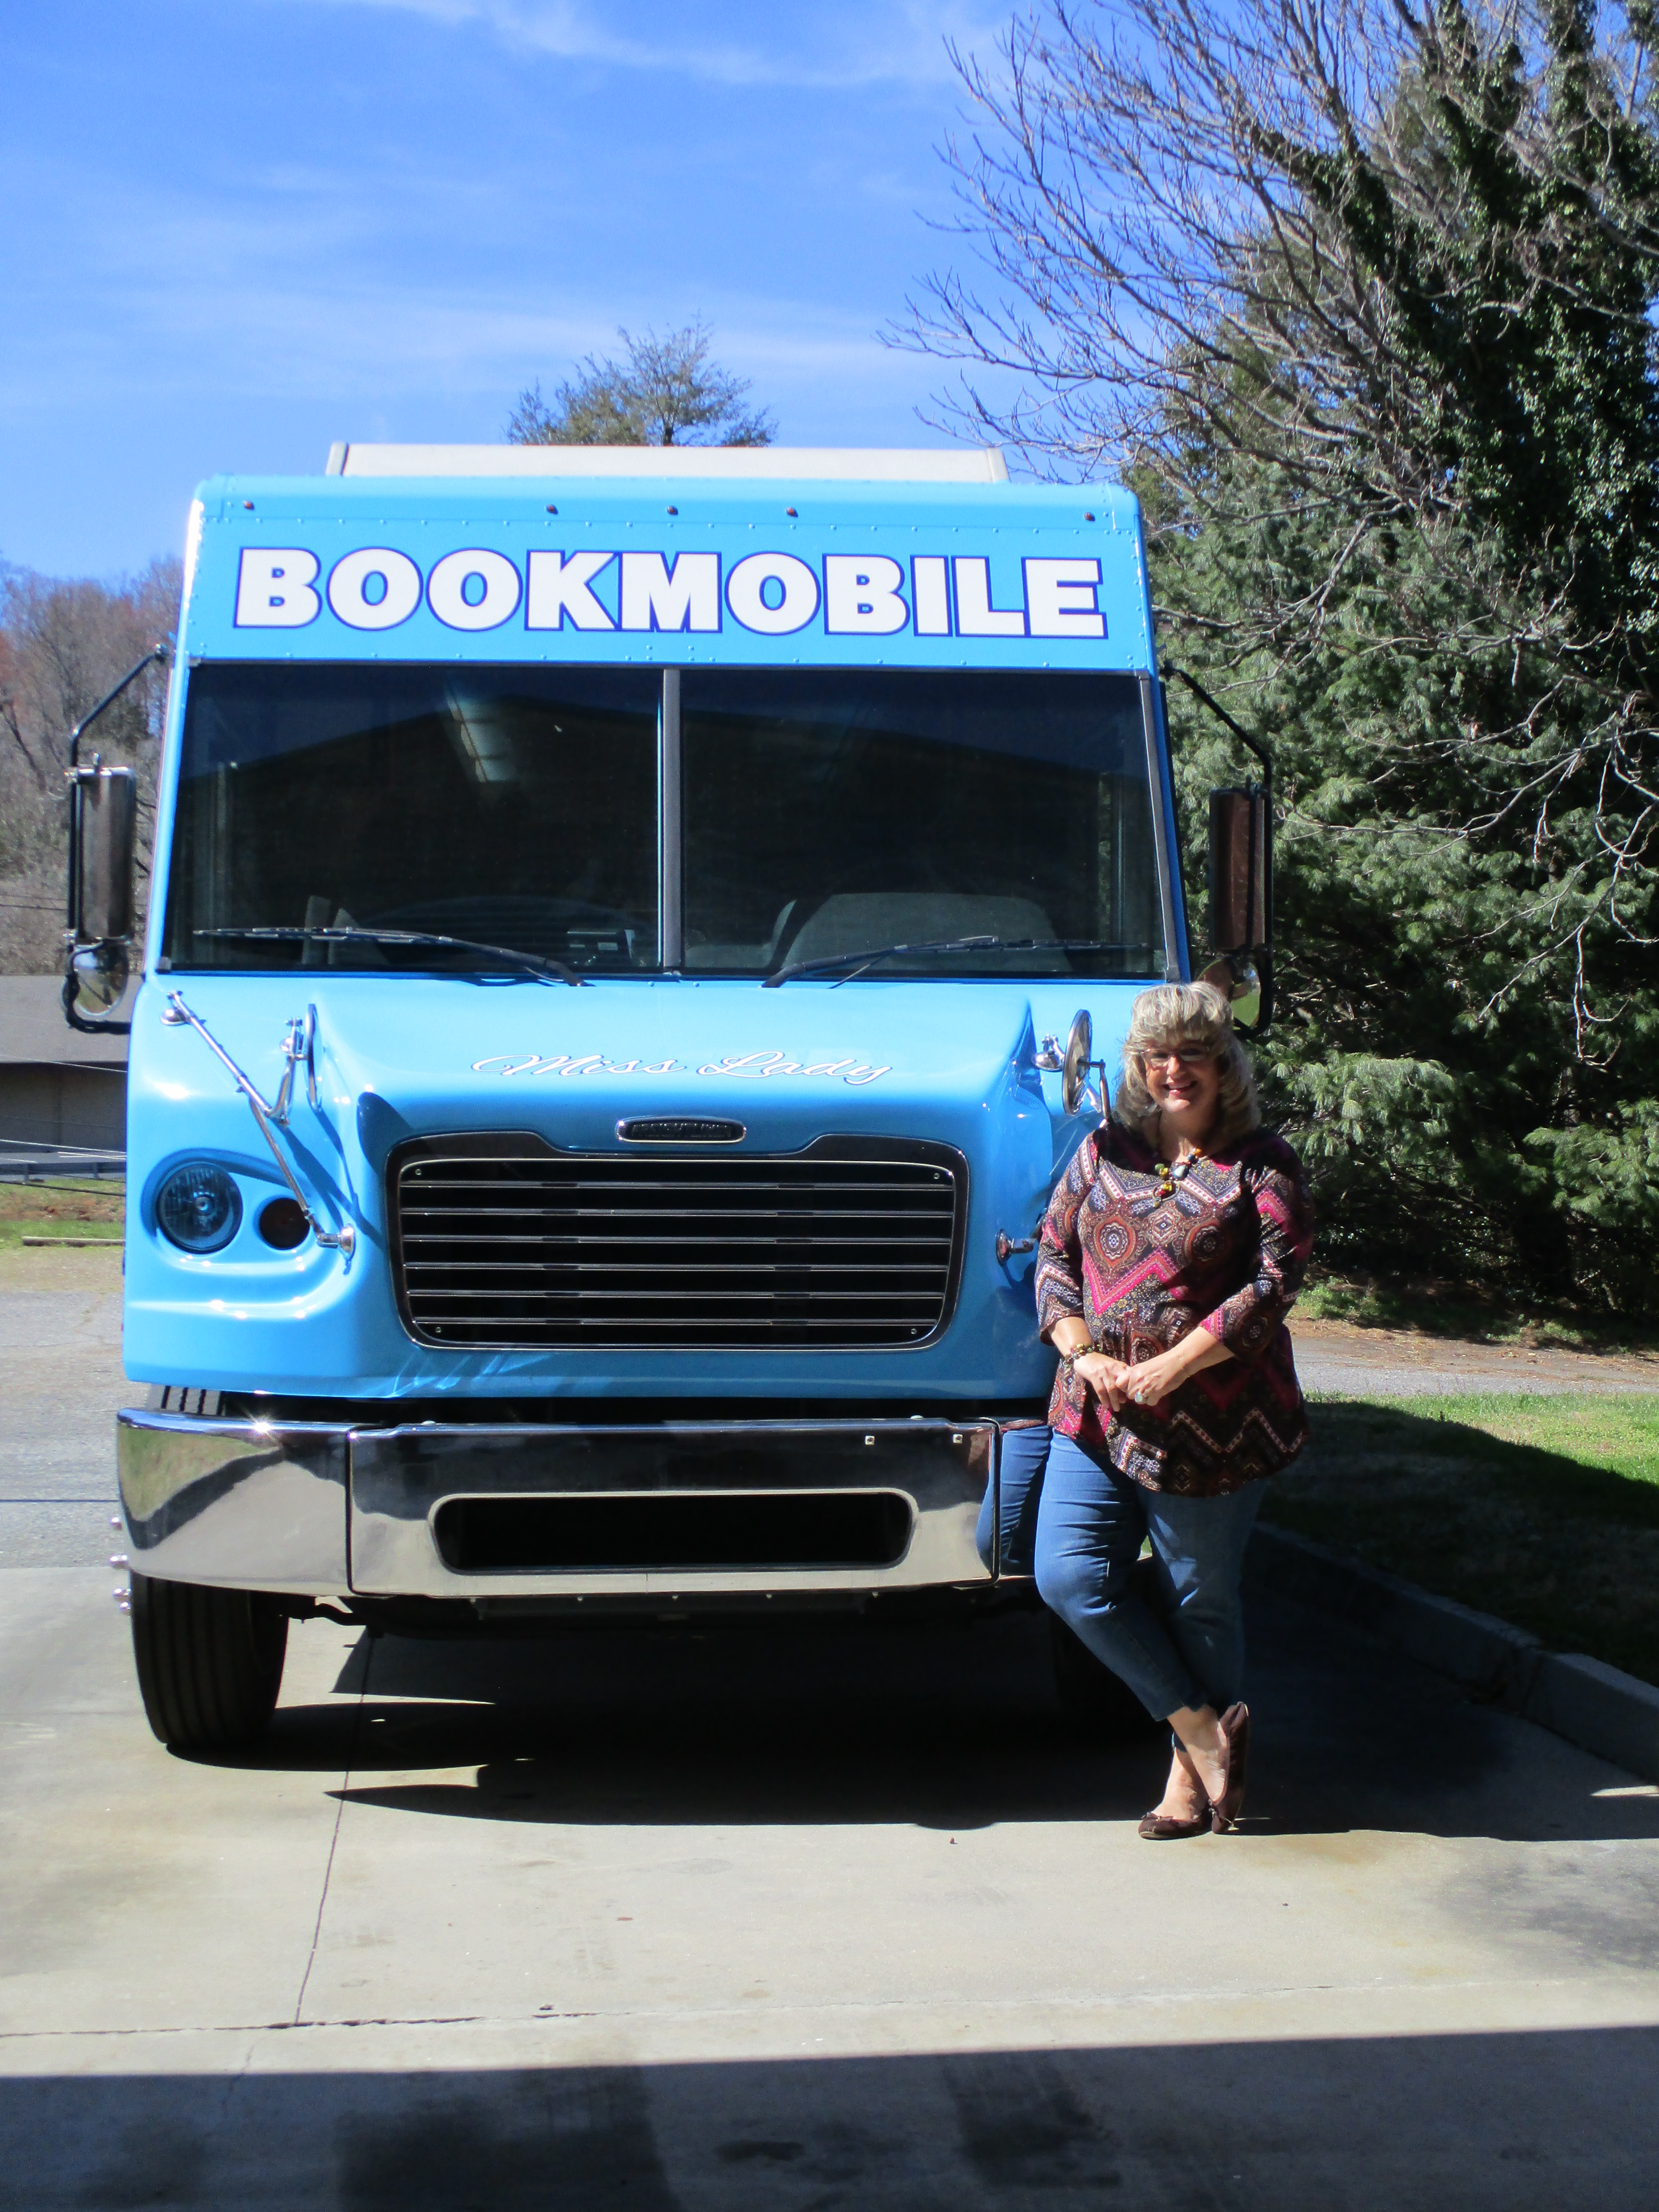 bookmobile driver tammy cope standing with the bookmobile front profile